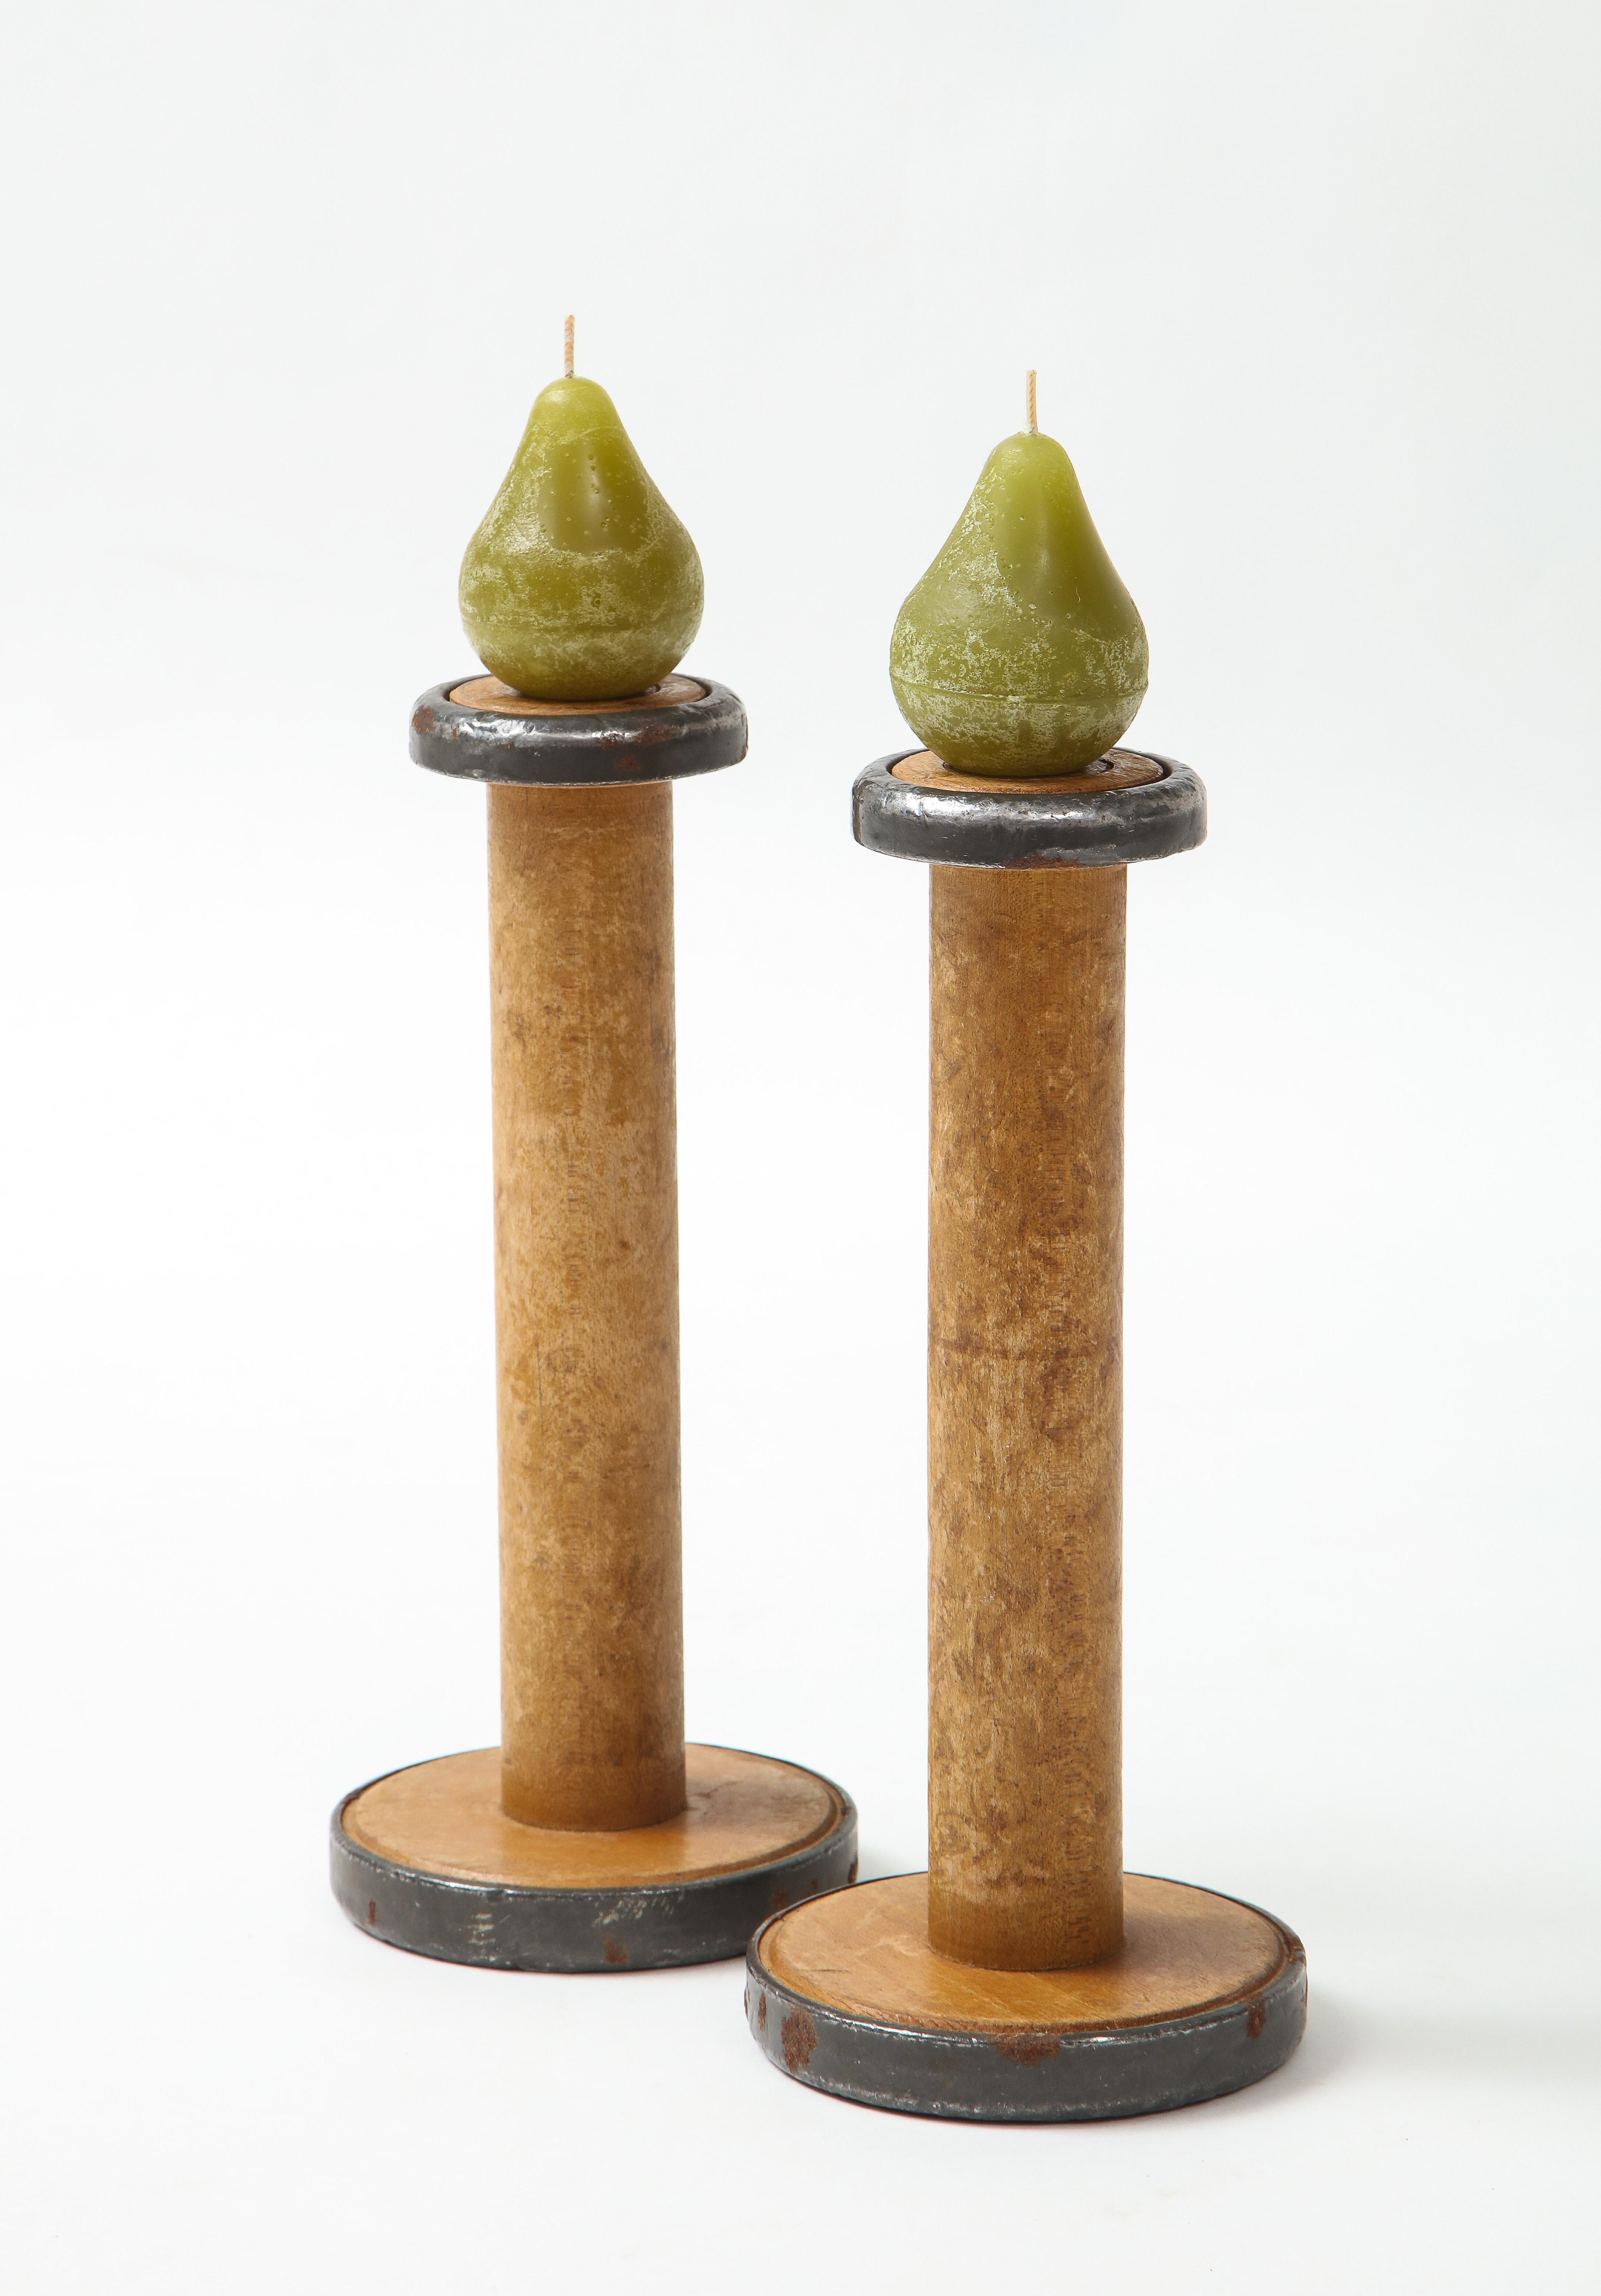 Pair of Industrial 19th century wooden spool candlesticks with hand poured pear candles.